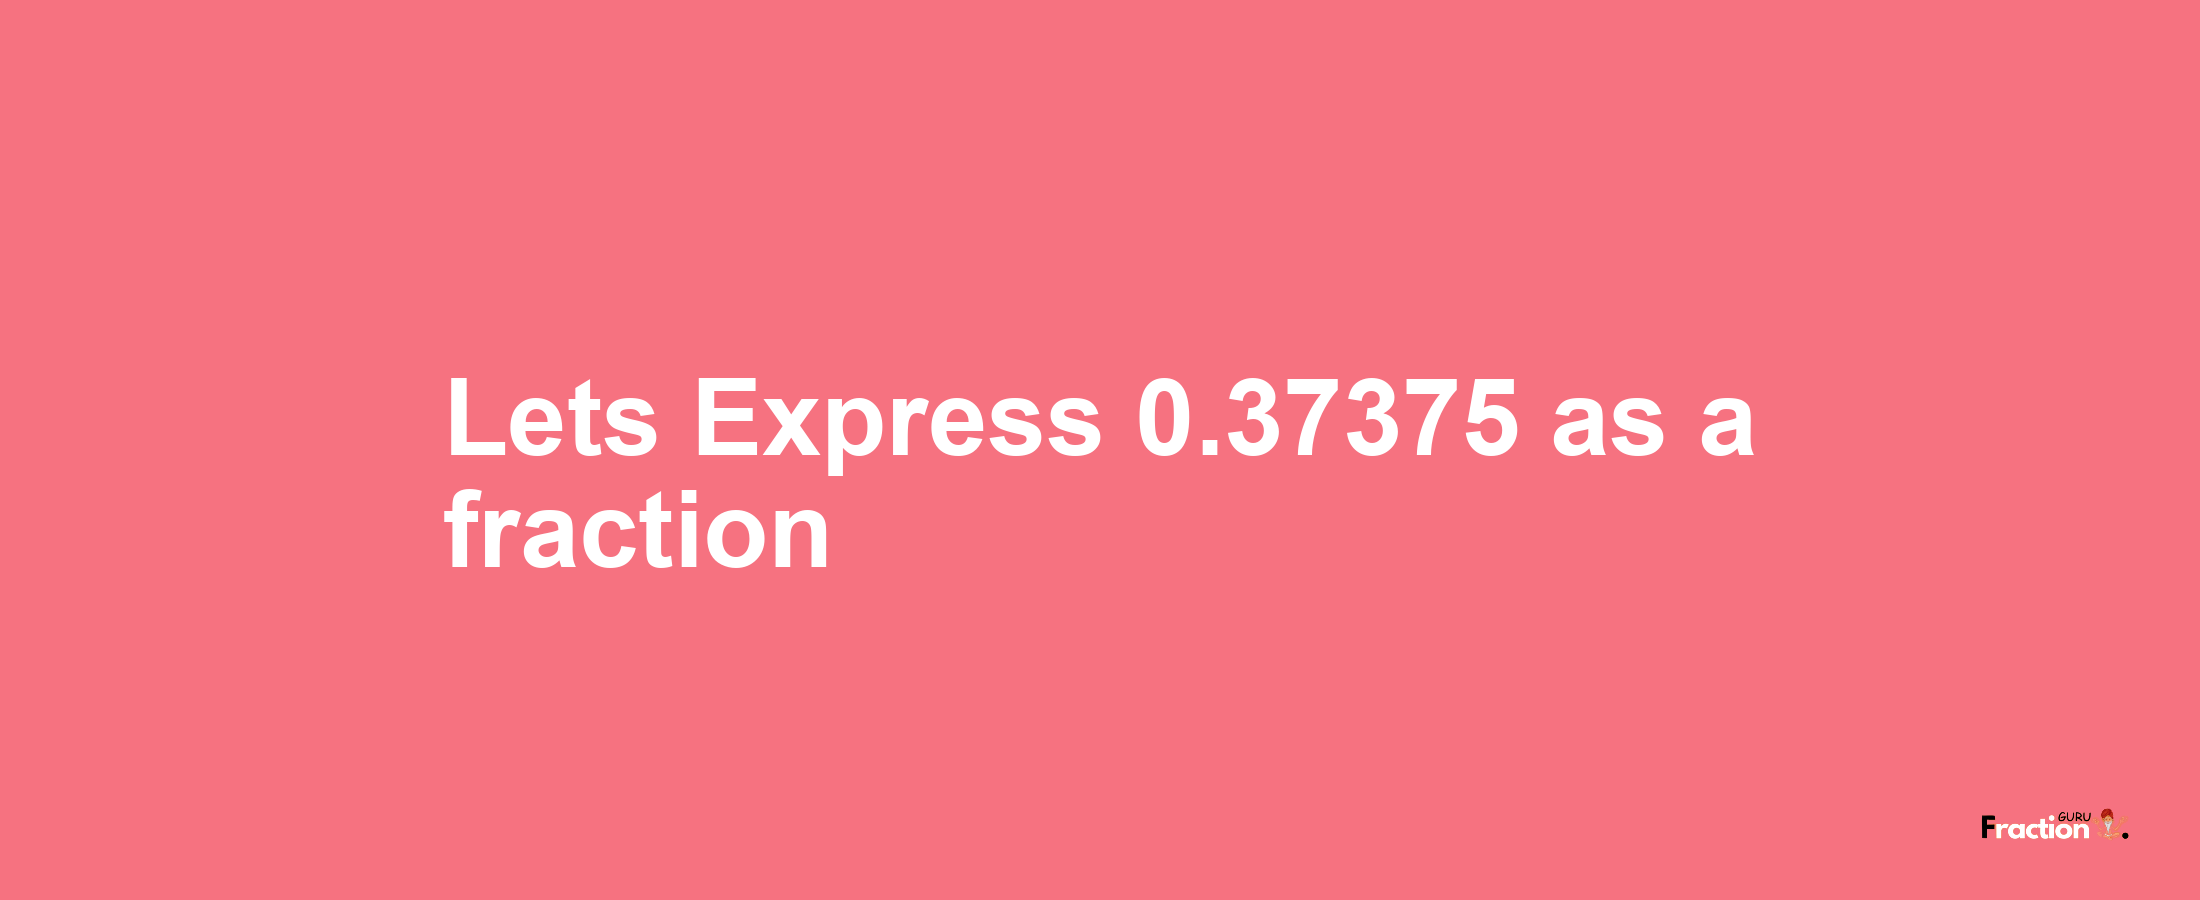 Lets Express 0.37375 as afraction